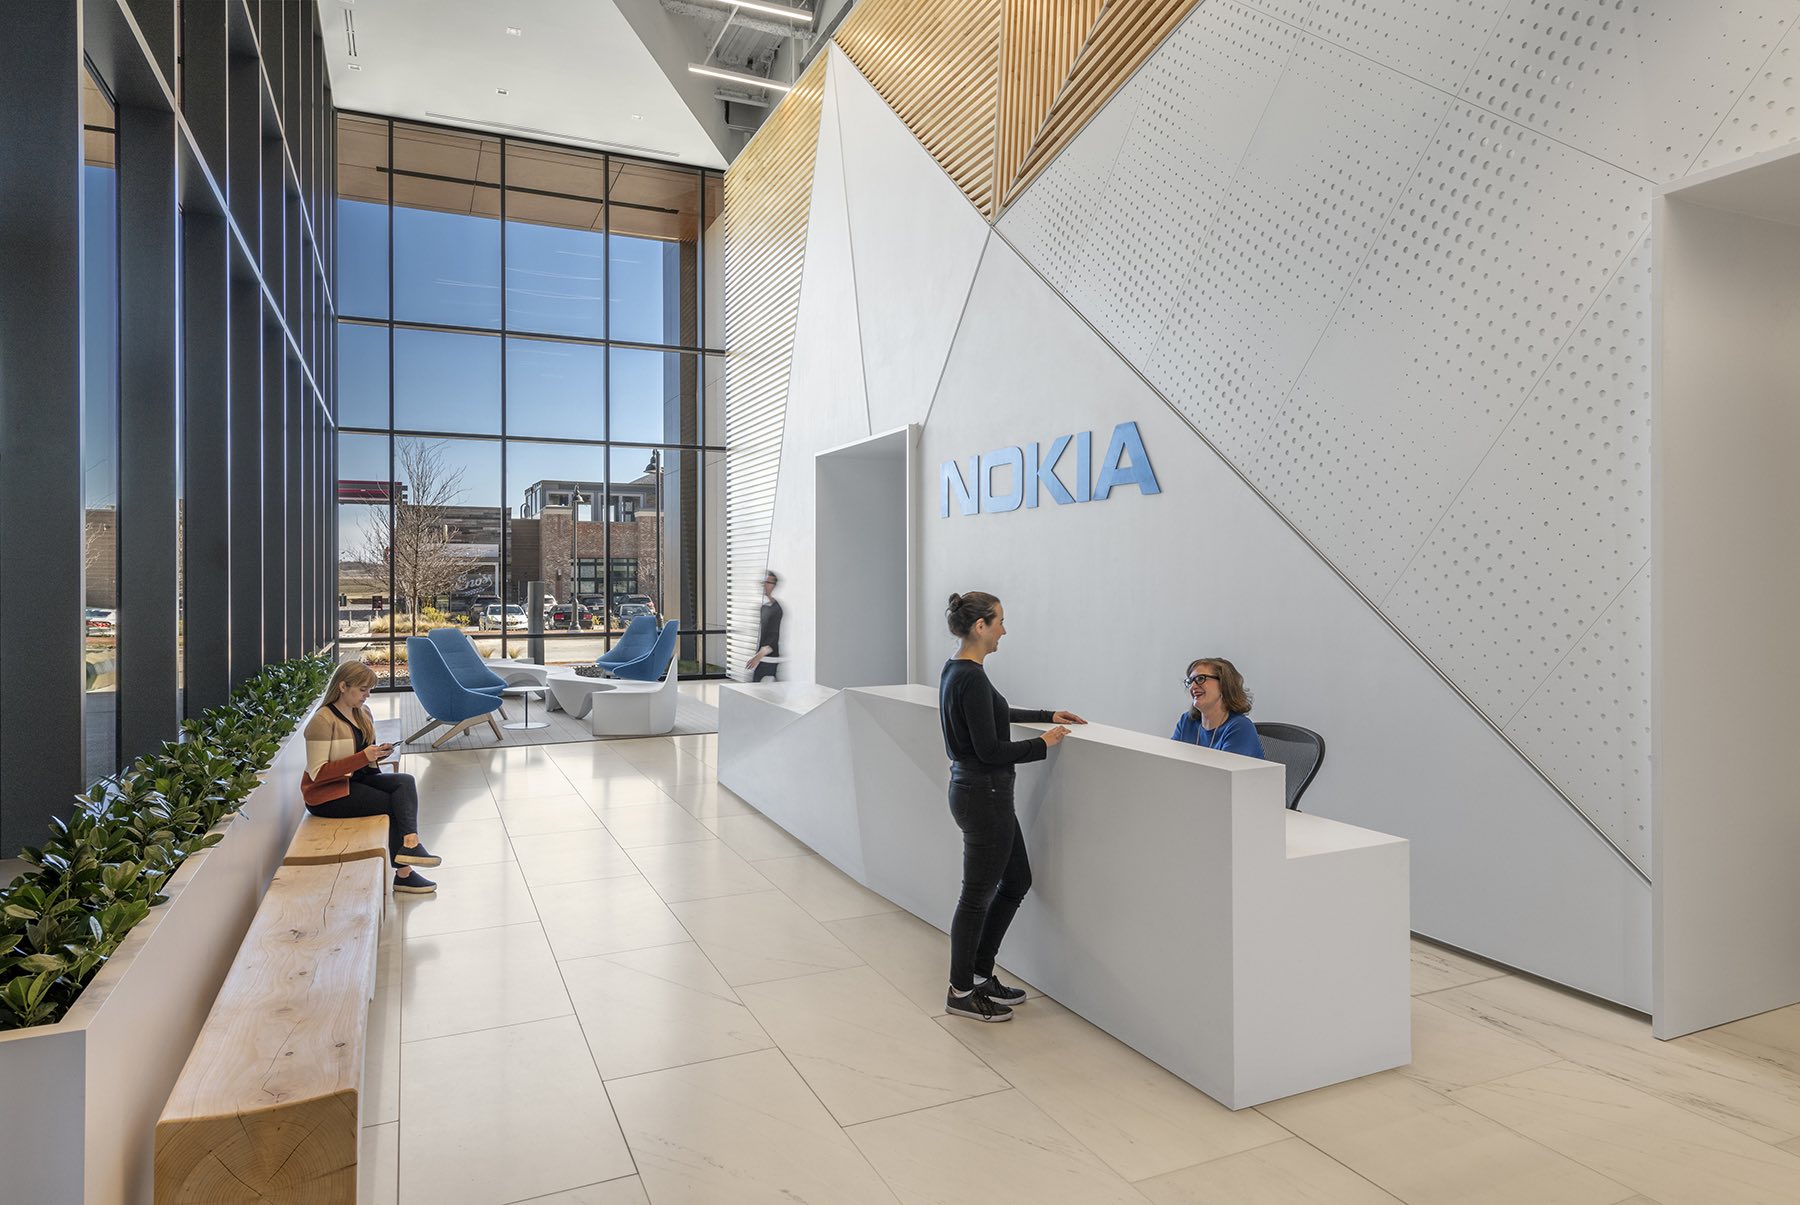 A Tour of Nokia’s New Dallas Office